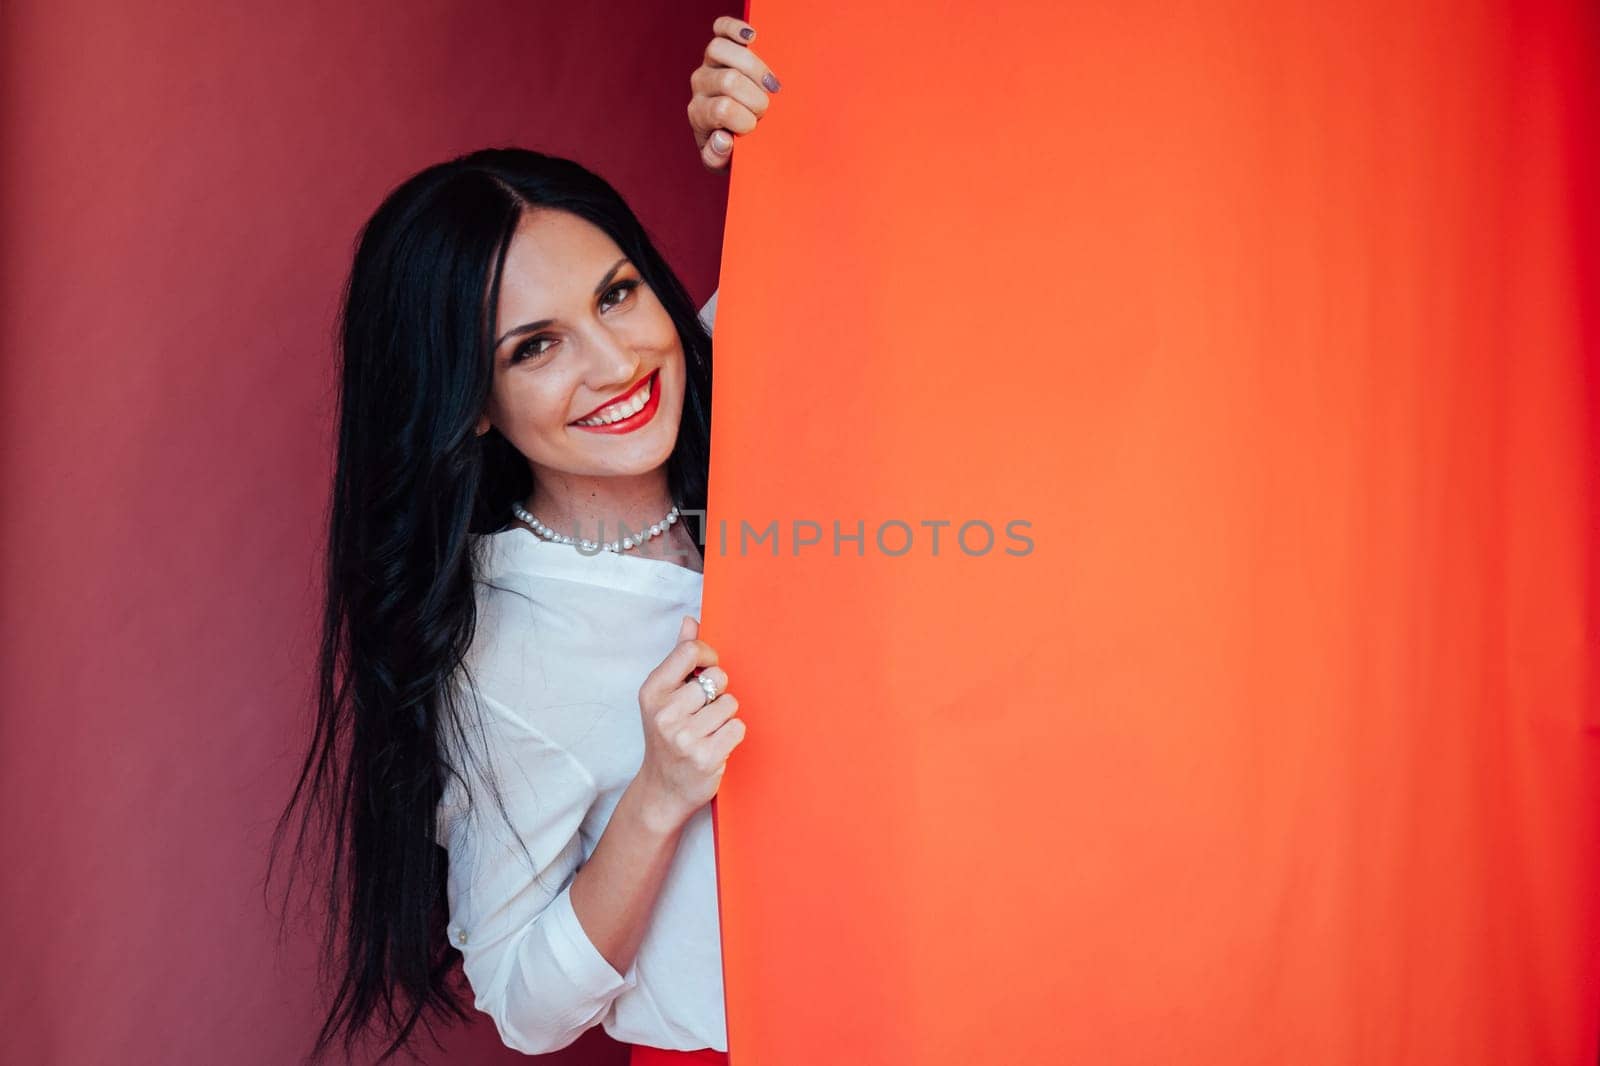 Portrait of happy satisfied beautiful brunette young woman with makeup in denim casual style standing and looking at camera with toothy smile. indoor studio shot, isolated on red background.